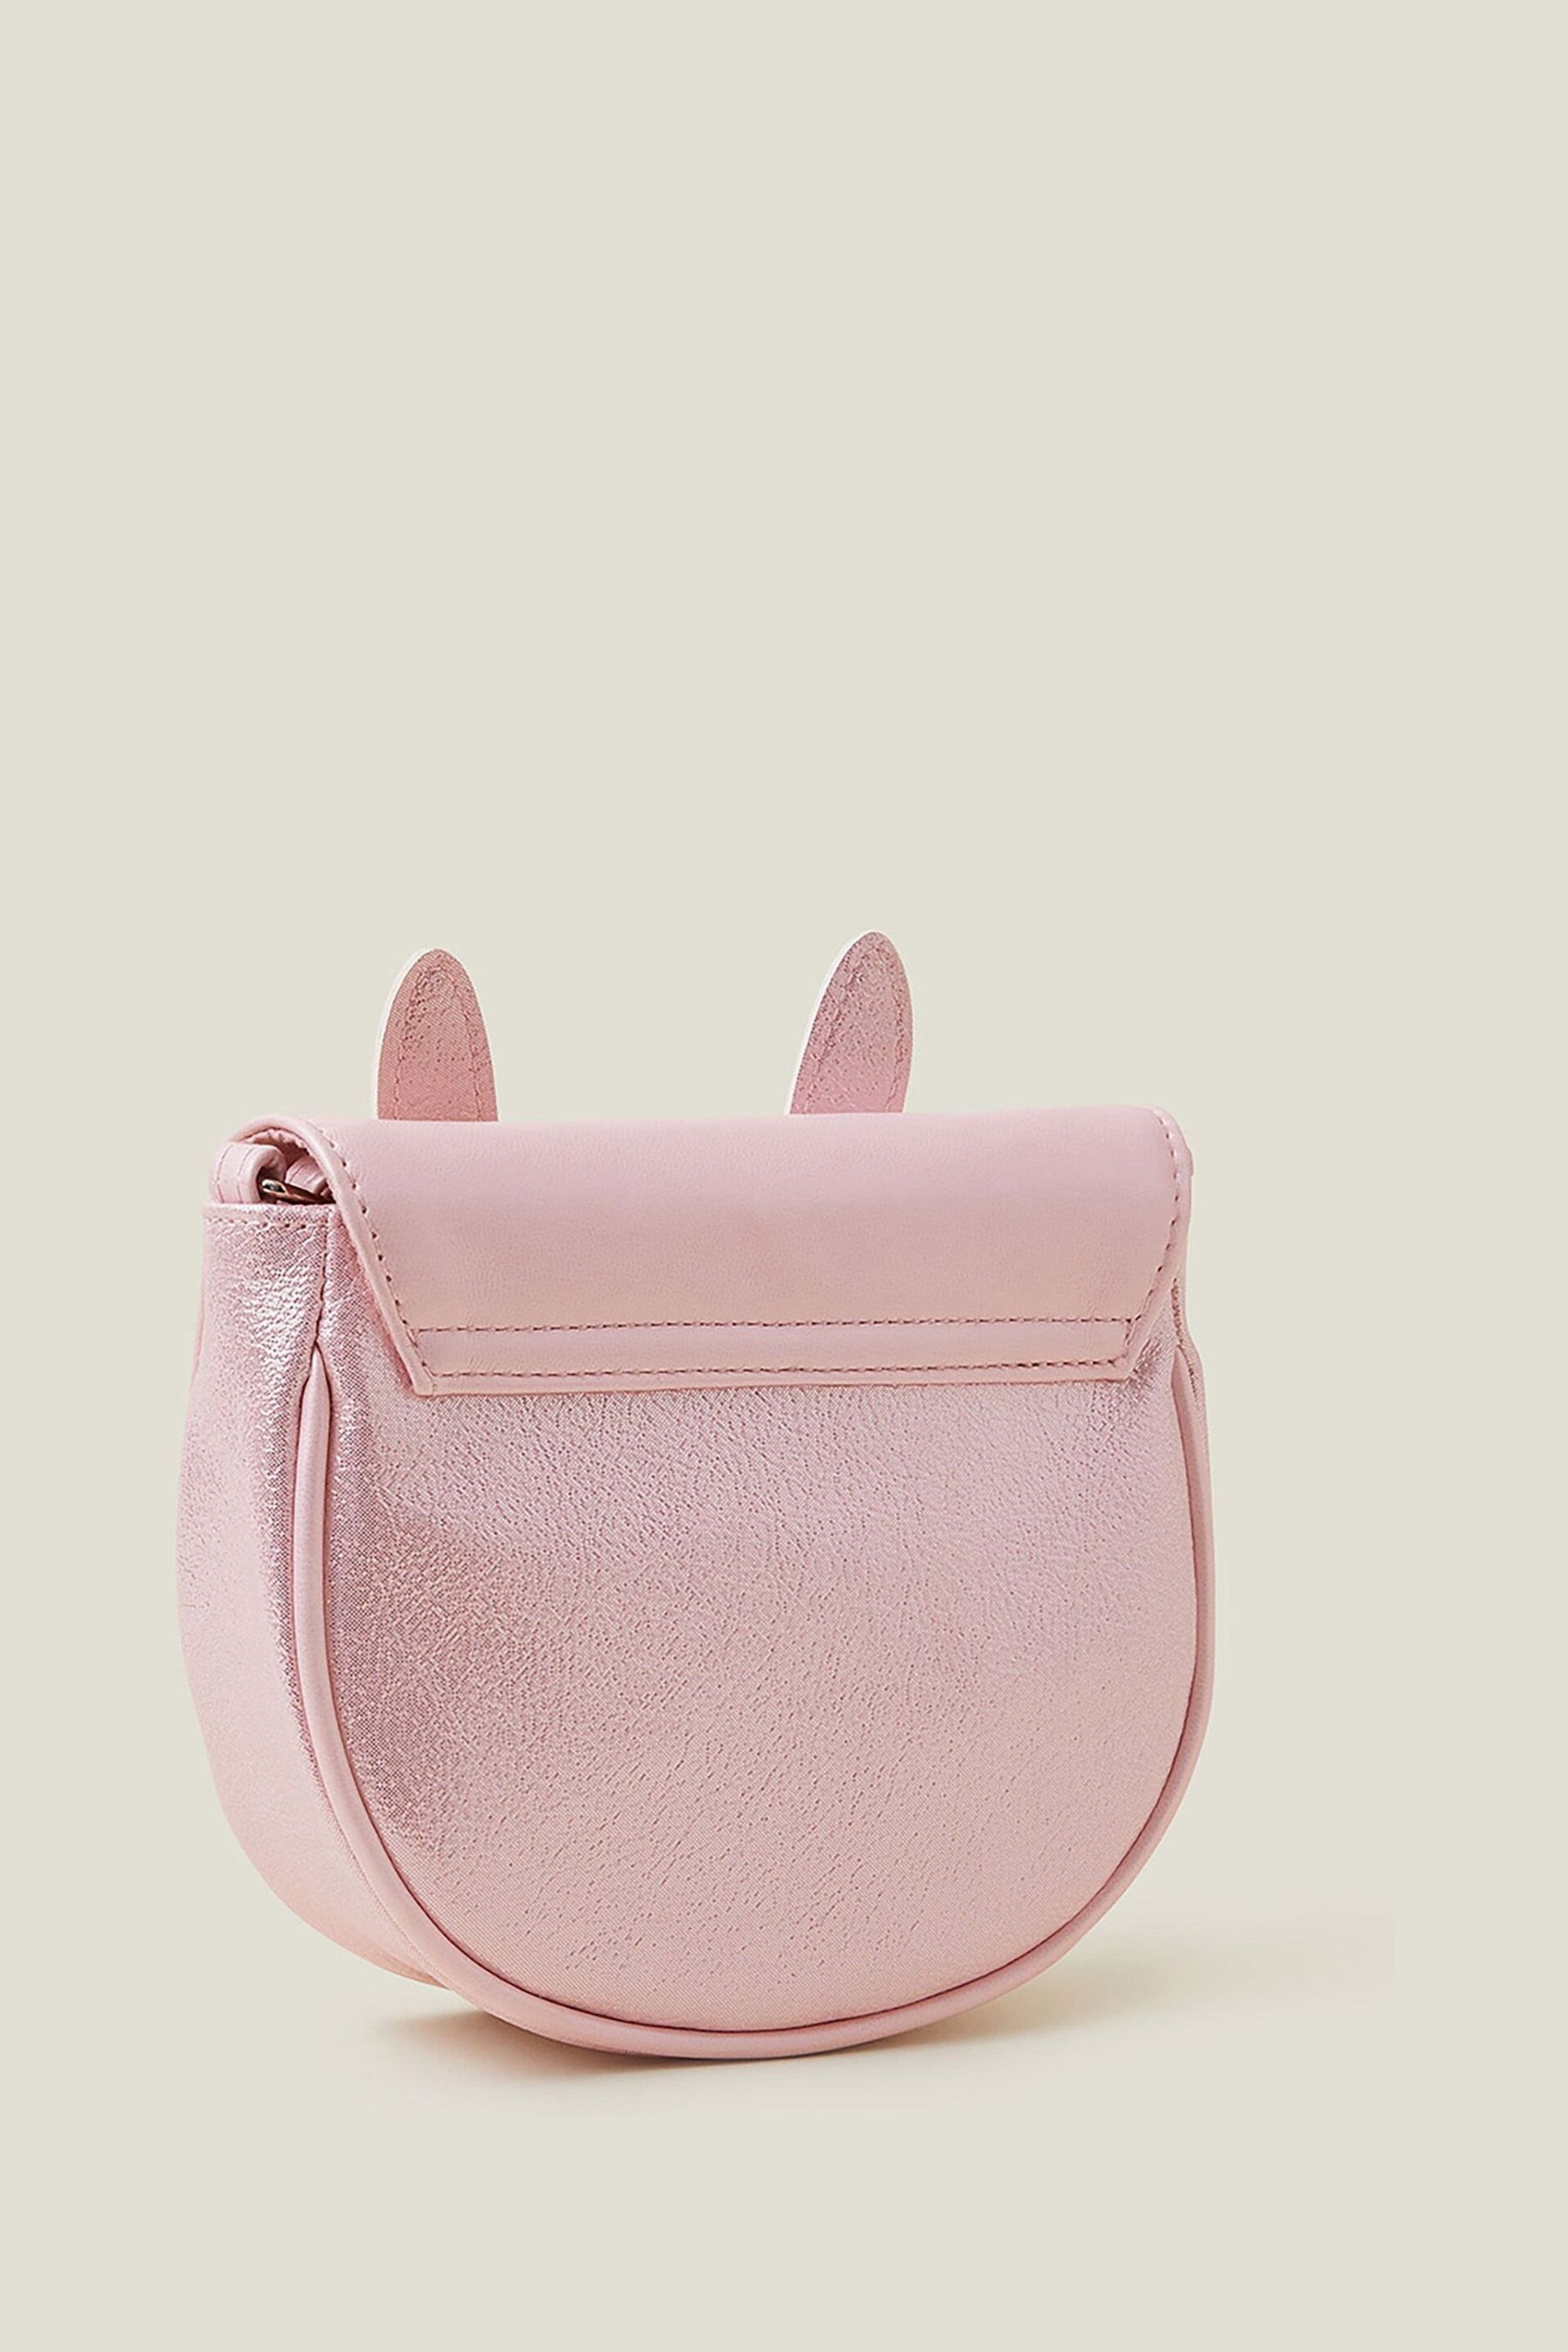 Accessorize Pink Girls Bunny Cross-Body Bag - Image 2 of 3